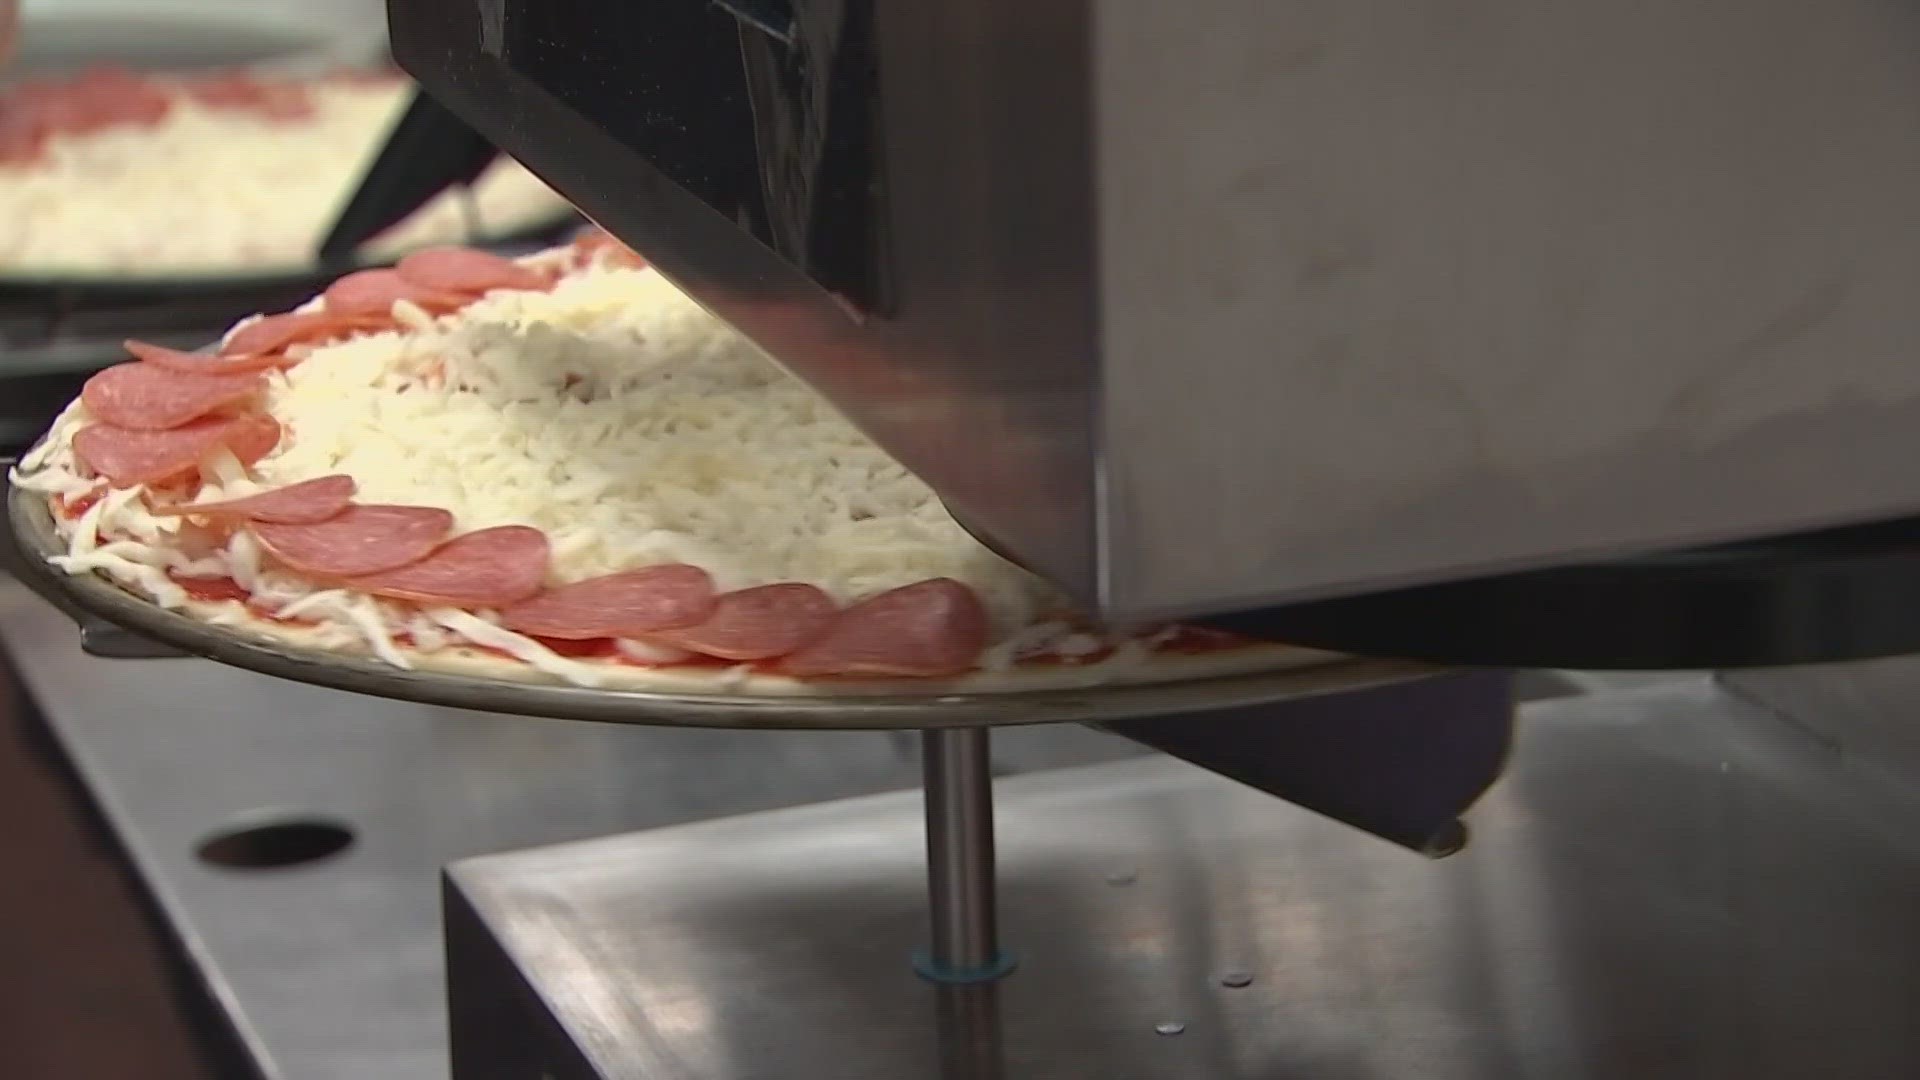 Wake Up CBUS got a first look at the future of pizza making: automated machines that can churn out pies in mere seconds.